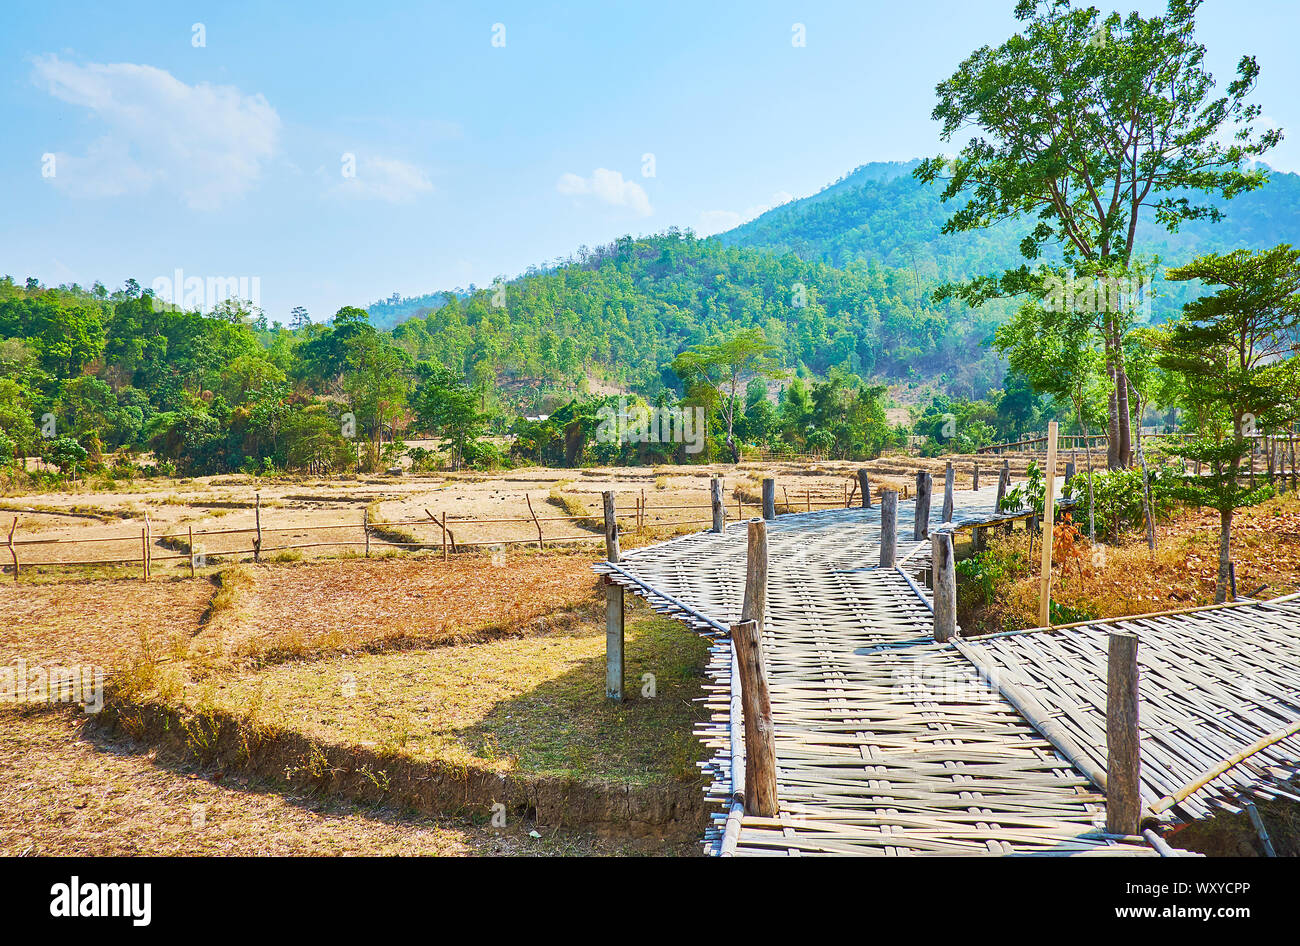 The bamboo bridges are popular constructions in farmlands of Thailand, Boon Ko Ku So bamboo bridge is one of such landmarks, located in Pai suburb Stock Photo